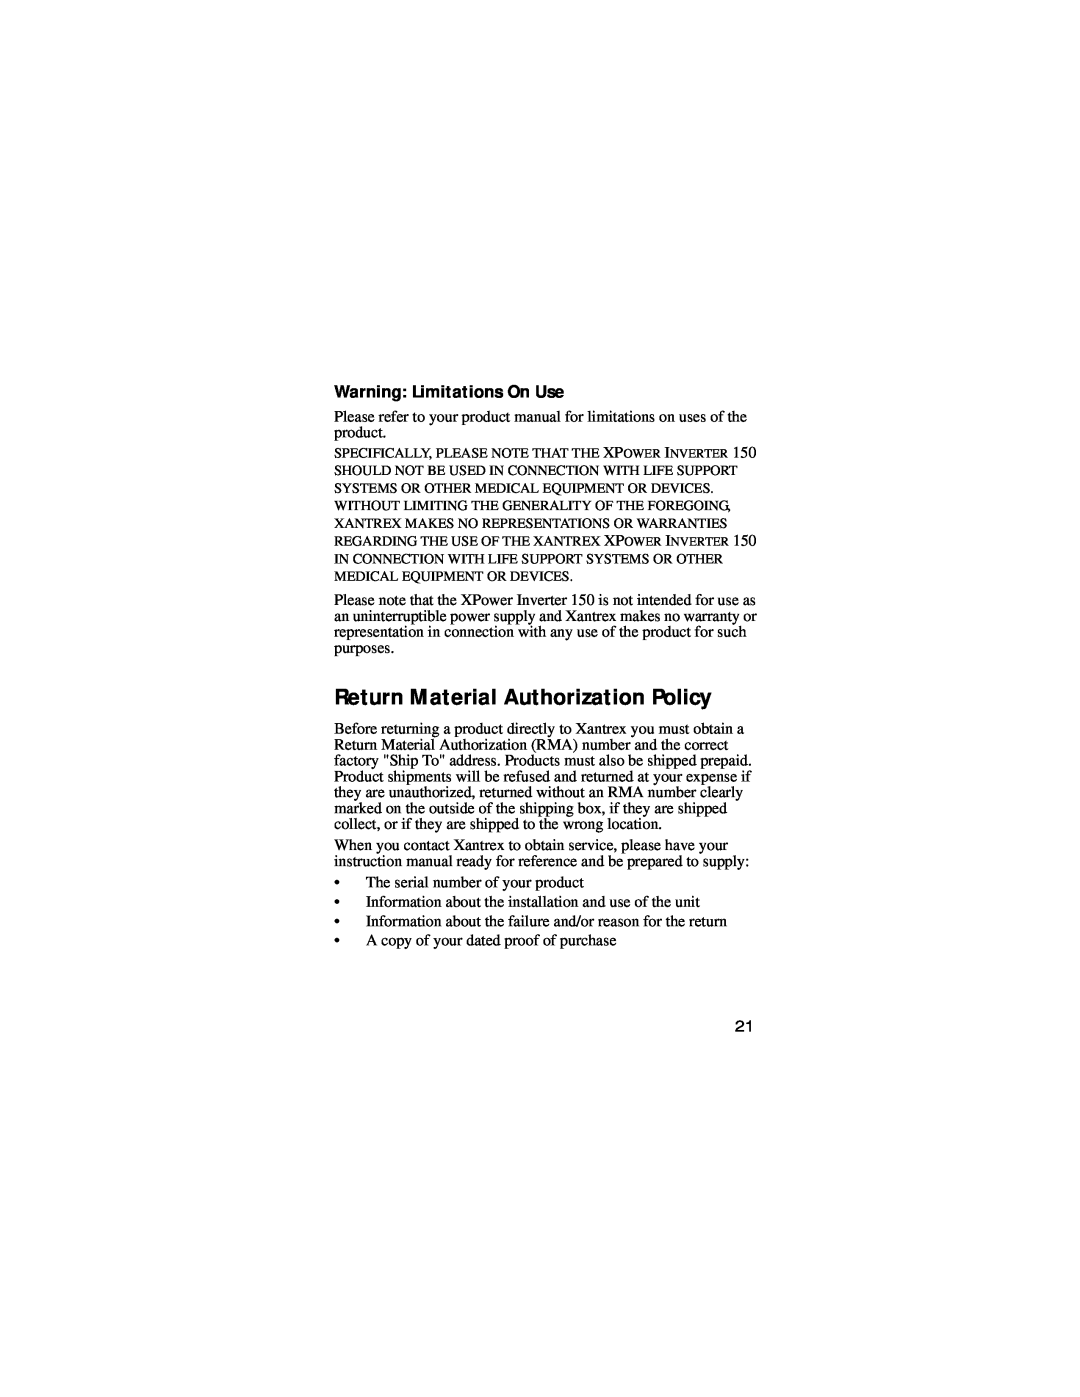 Xantrex Technology 150 manual Return Material Authorization Policy, Warning Limitations On Use 